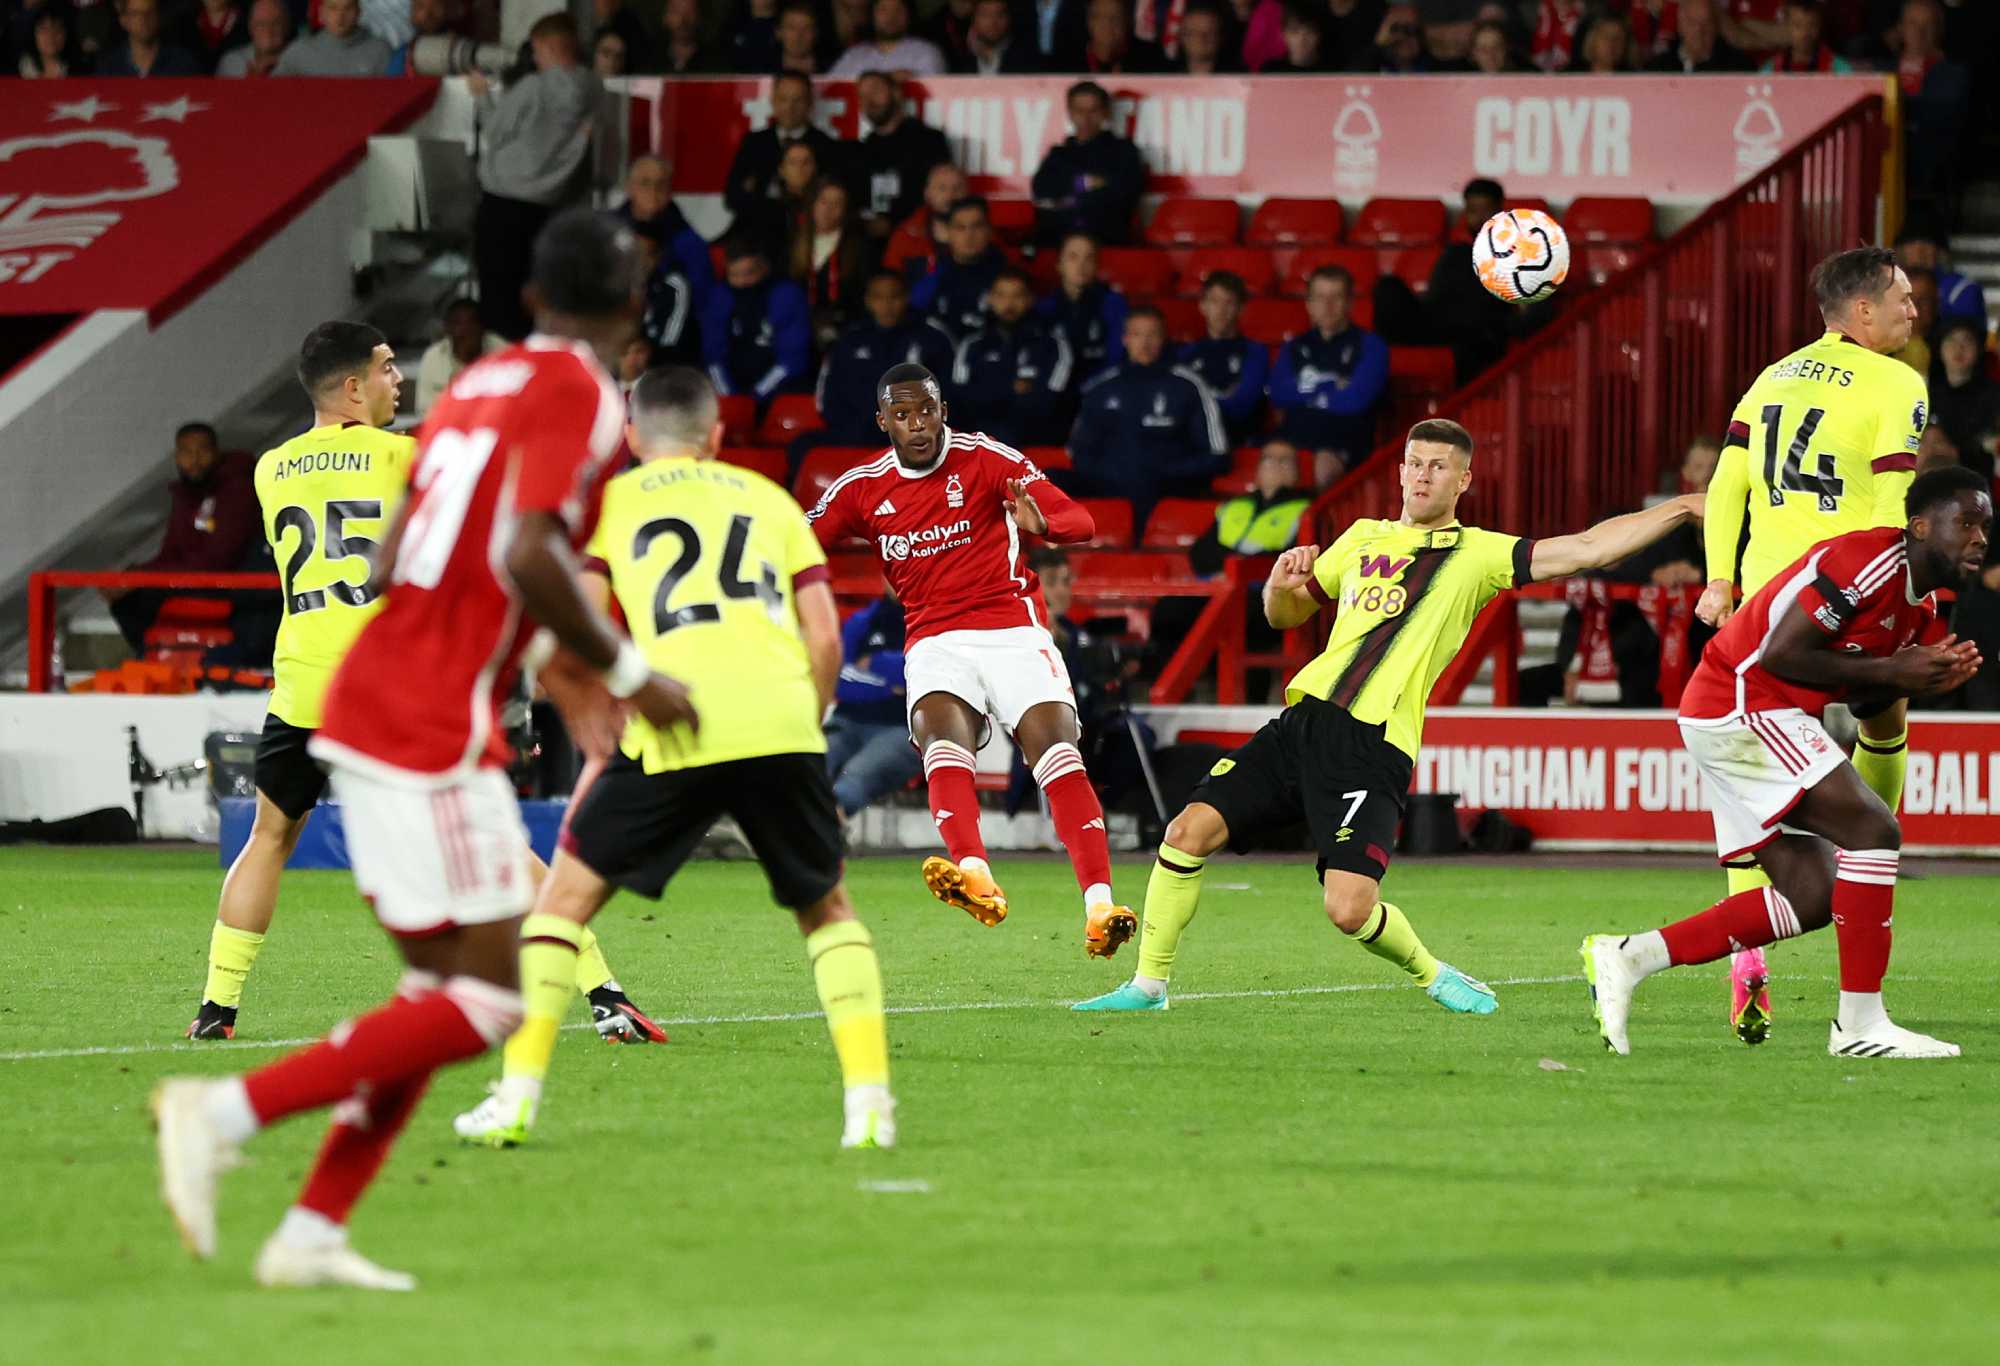 NOTTINGHAM, ENGLAND - SEPTEMBER 18: Callum Hudson-Odoi of Nottingham Forest scores the team's first goal during the Premier League match between Nottingham Forest and Burnley FC at City Ground on September 18, 2023 in Nottingham, England. (Photo by Marc Atkins/Getty Images)